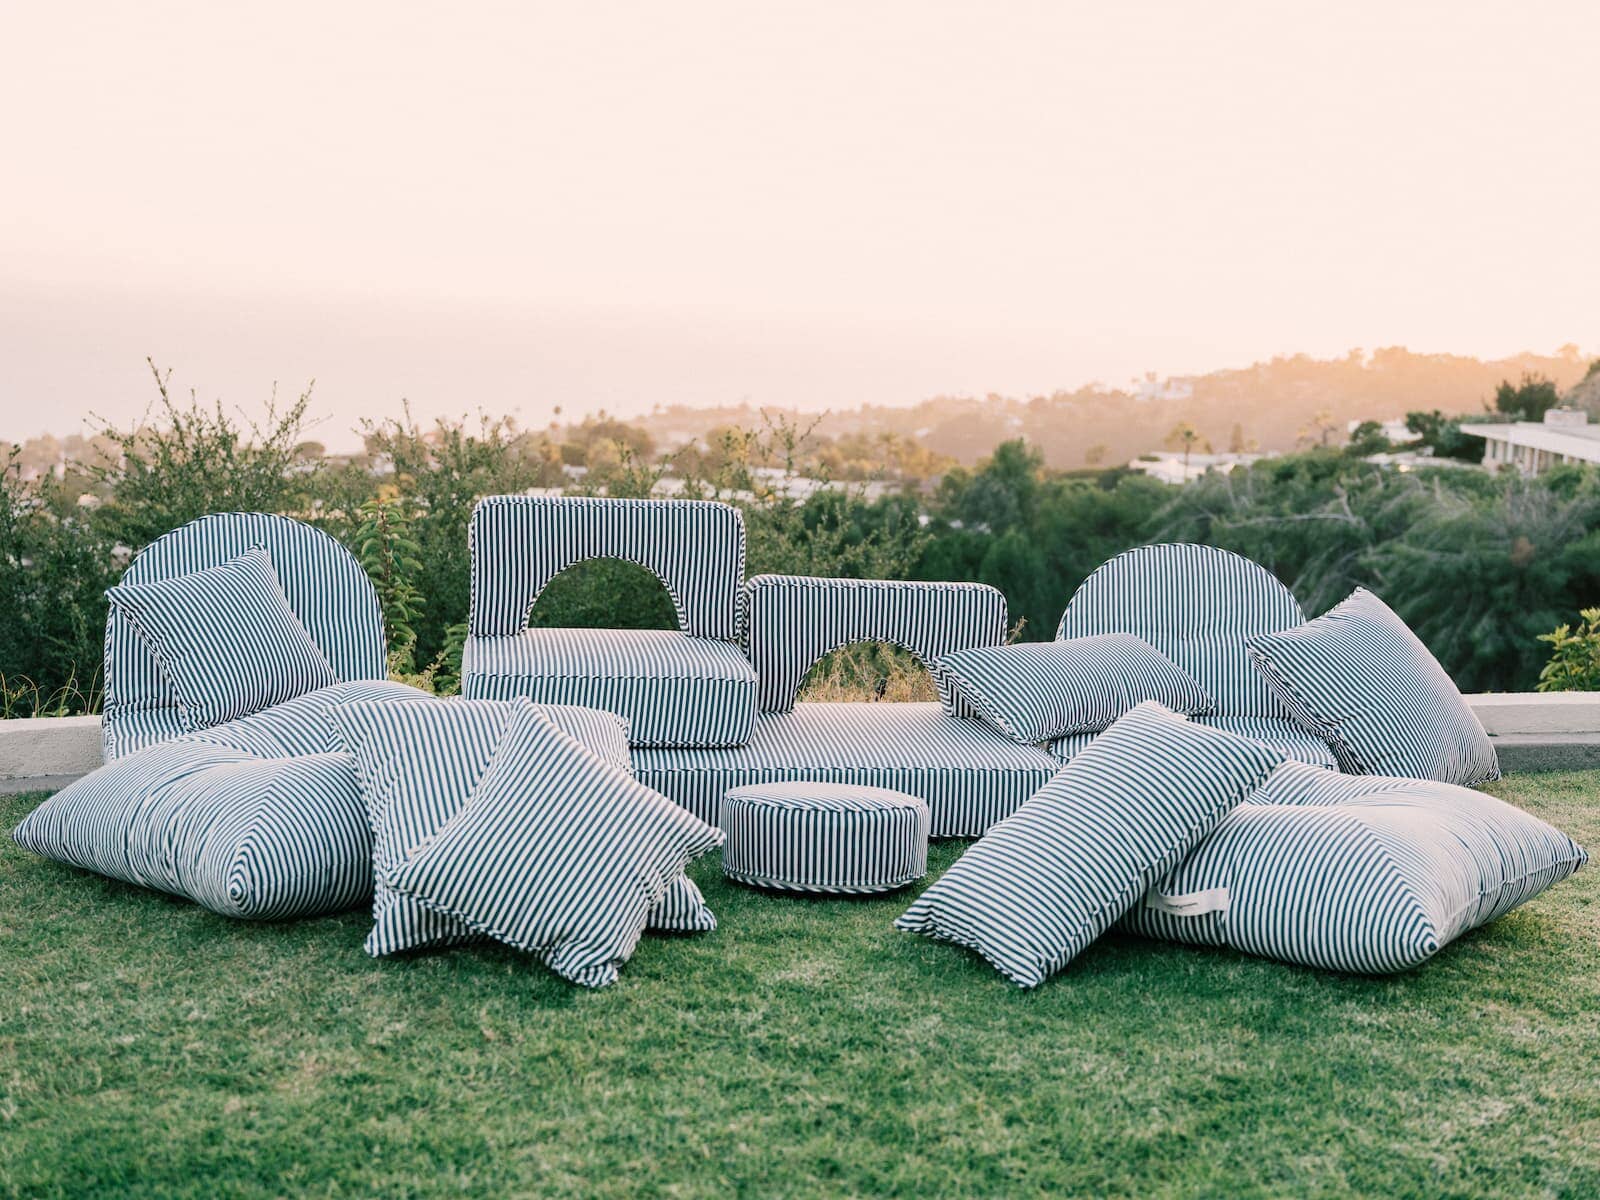 complete outdoor cushion collection on the grass